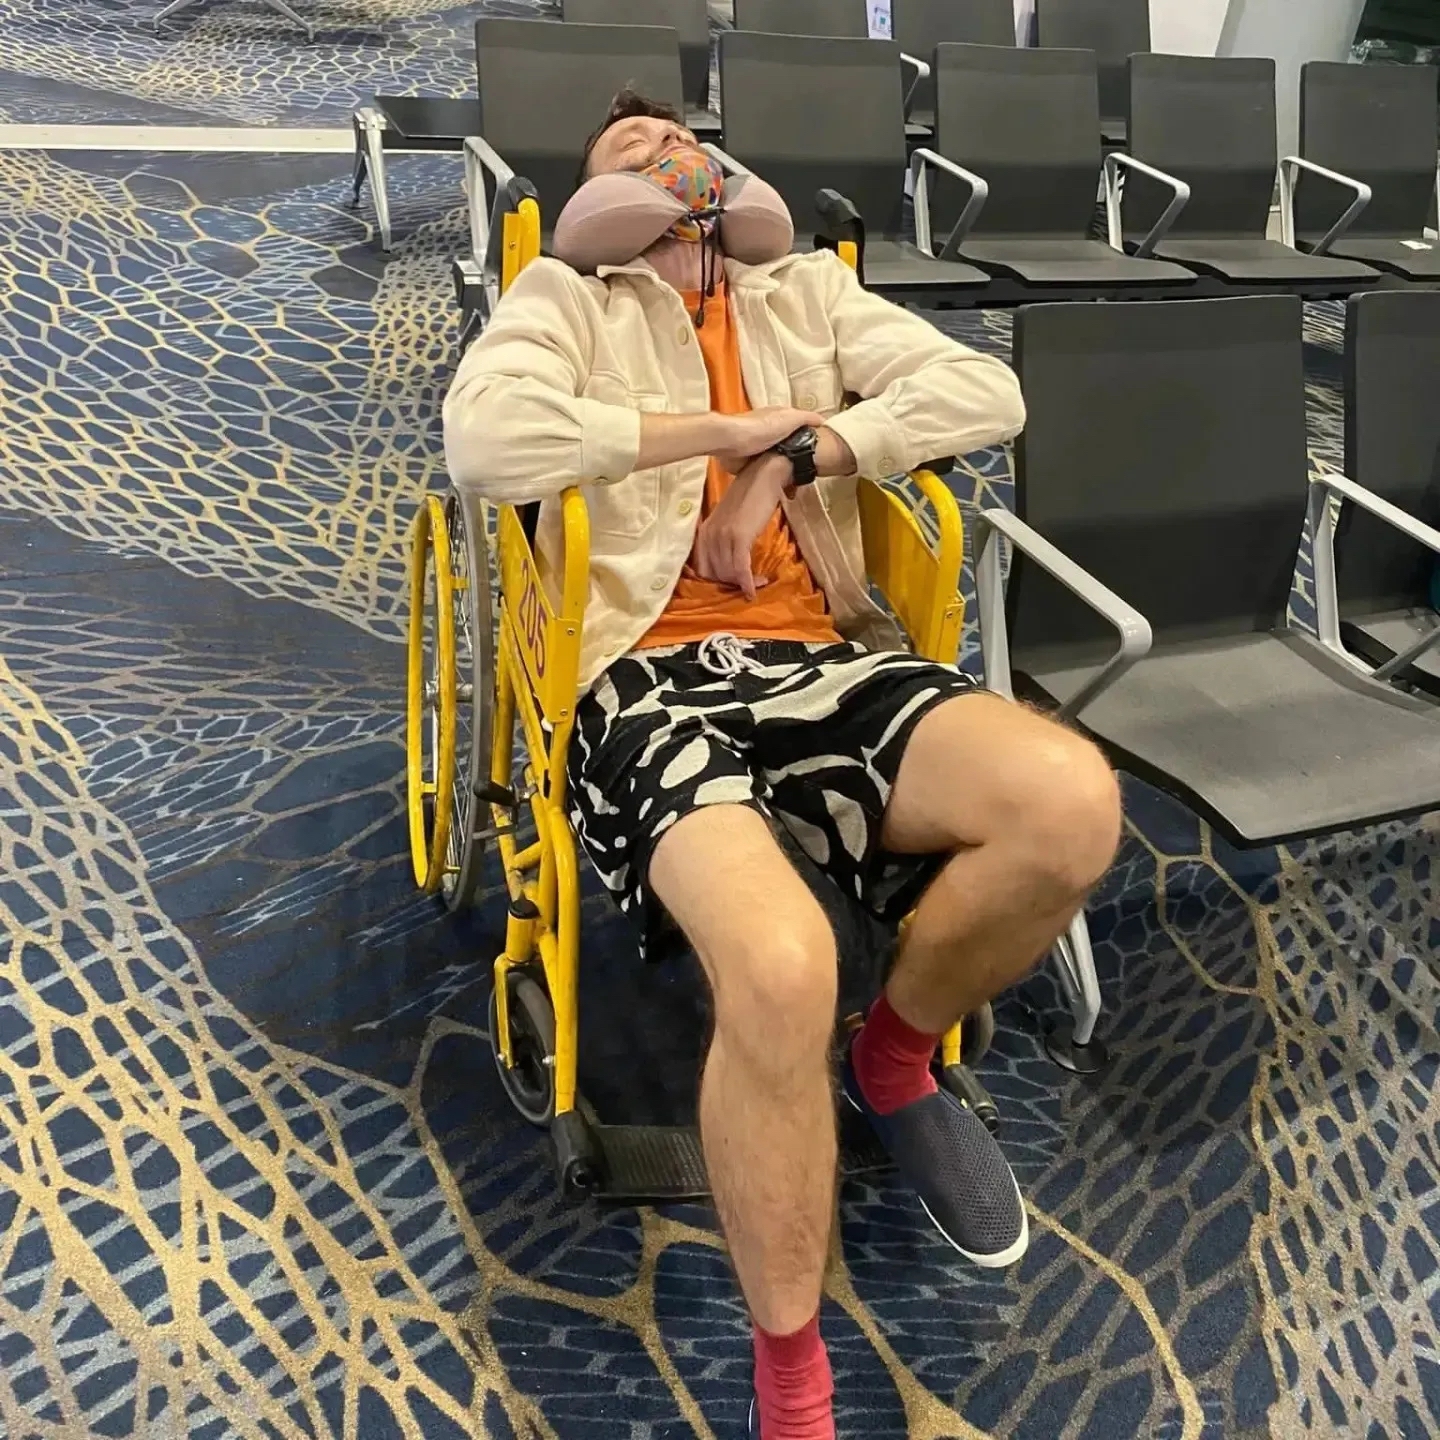 Fraser resting in the airport.